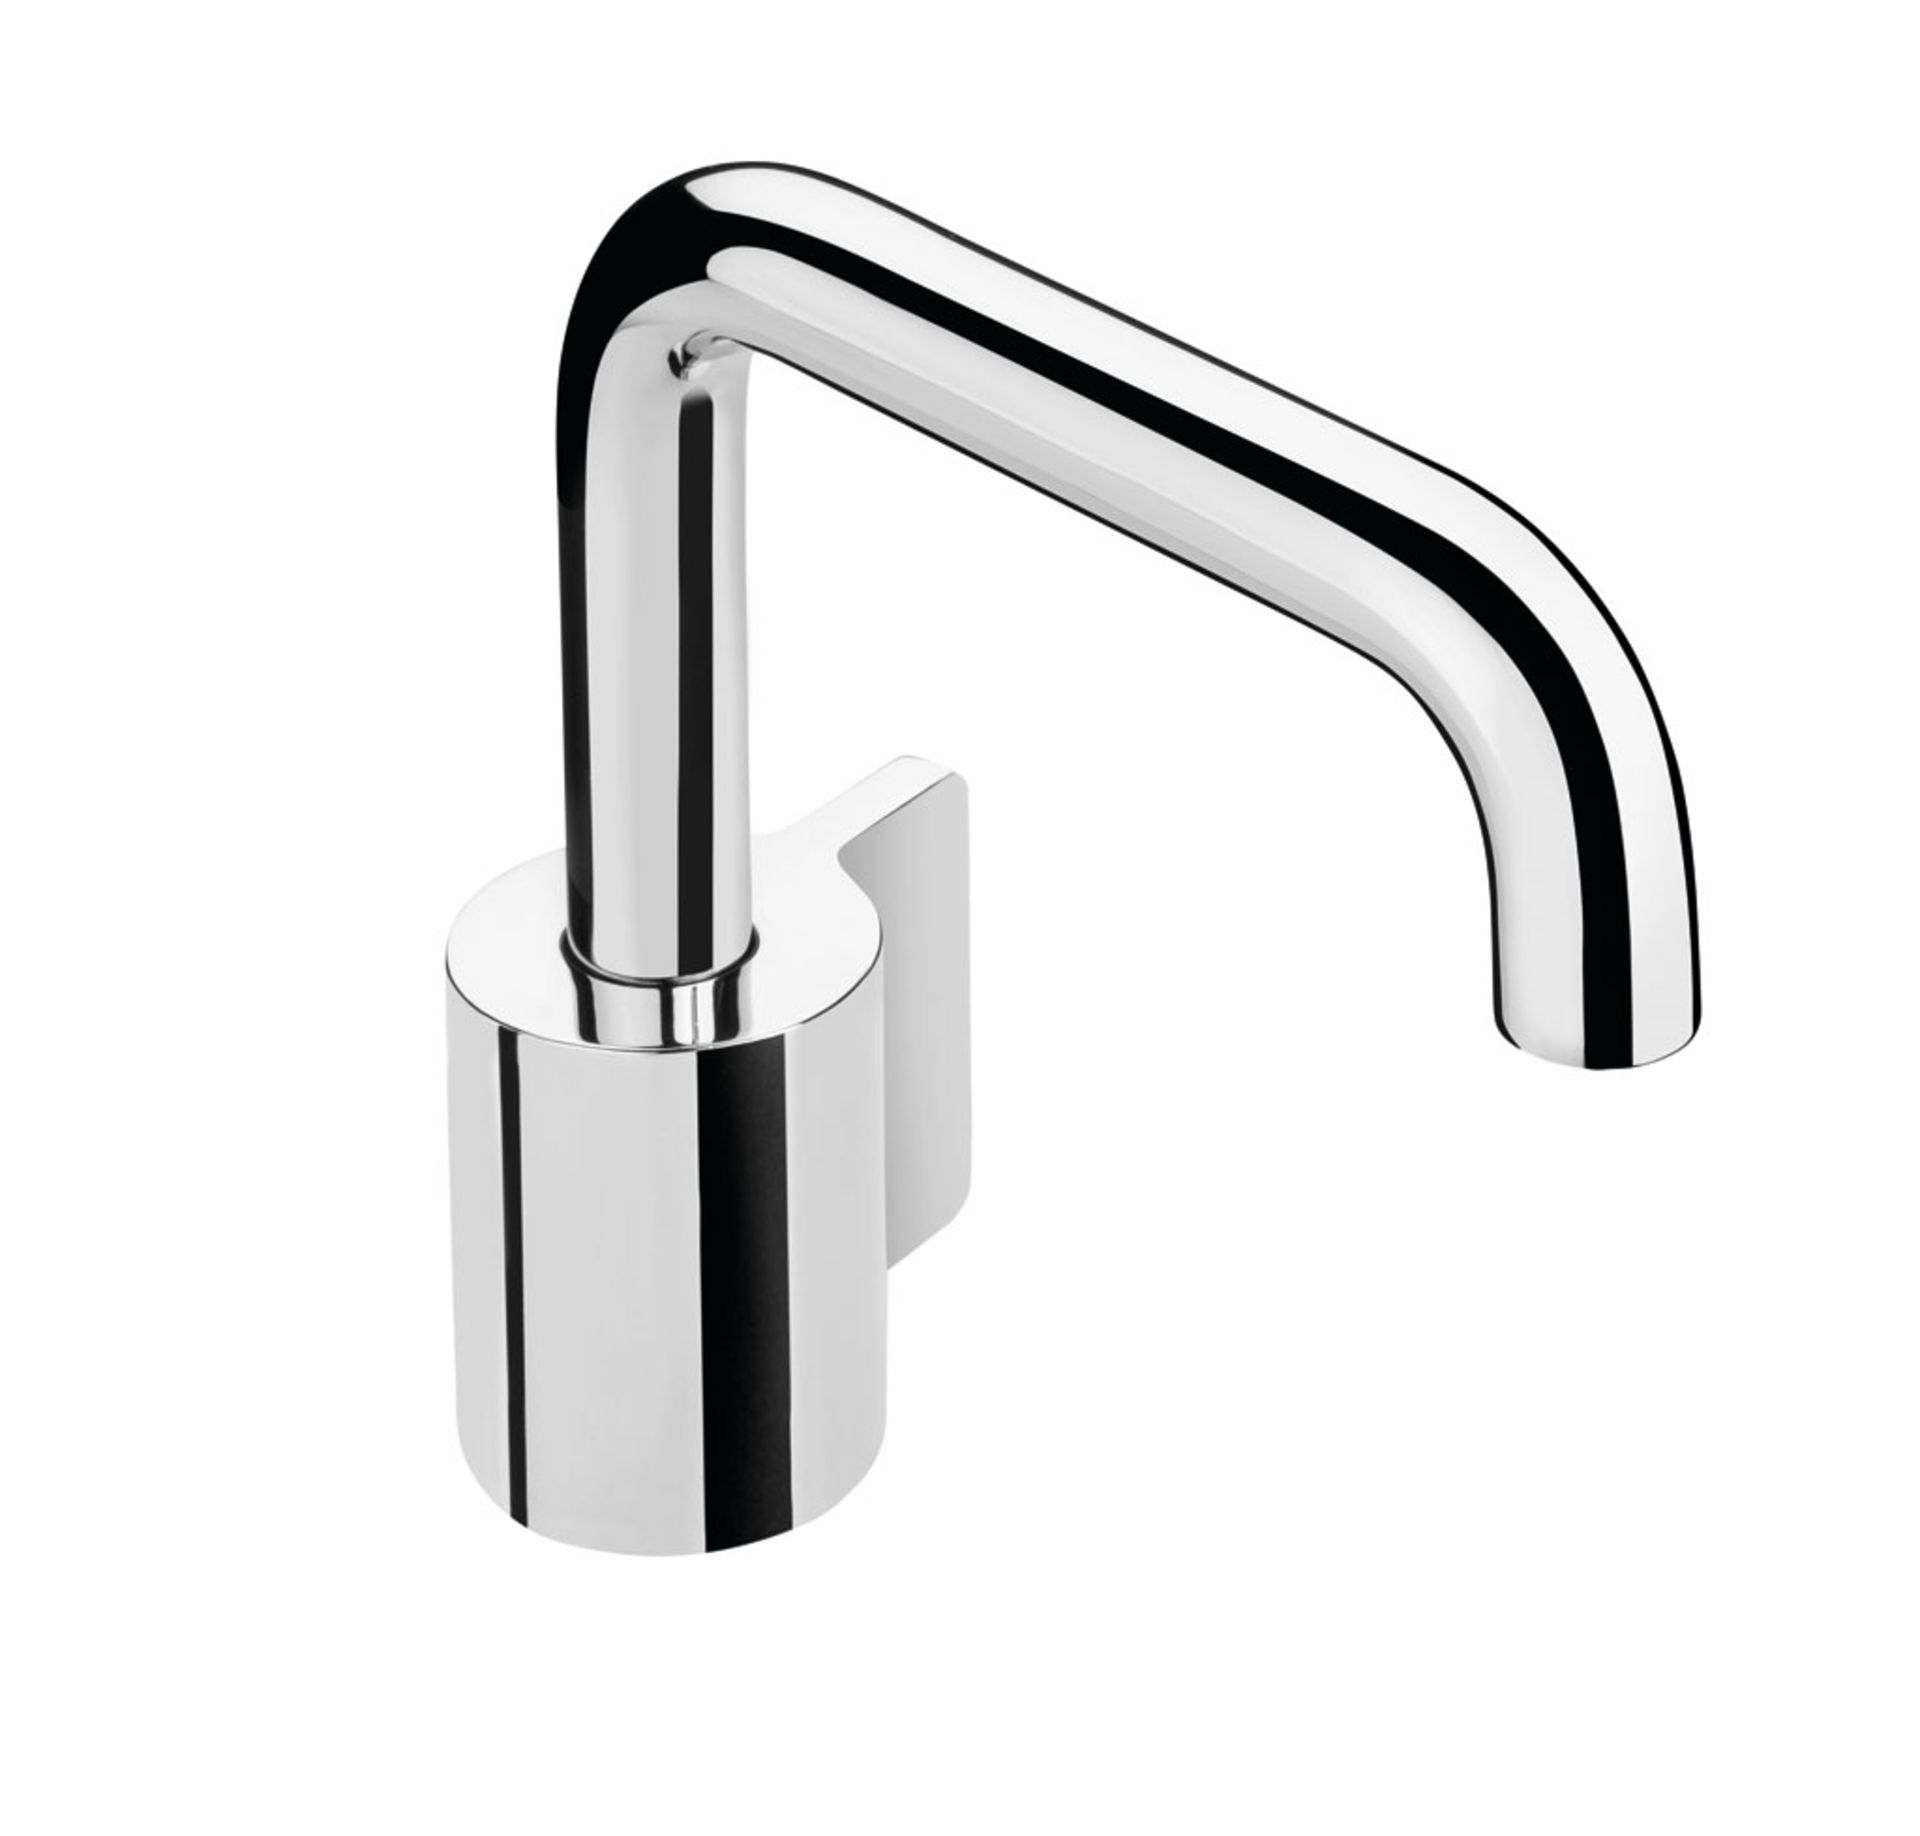 Cosmic Flow Single Lever Basin Mixer tap in chrome, unused nad boxed, RRP £300